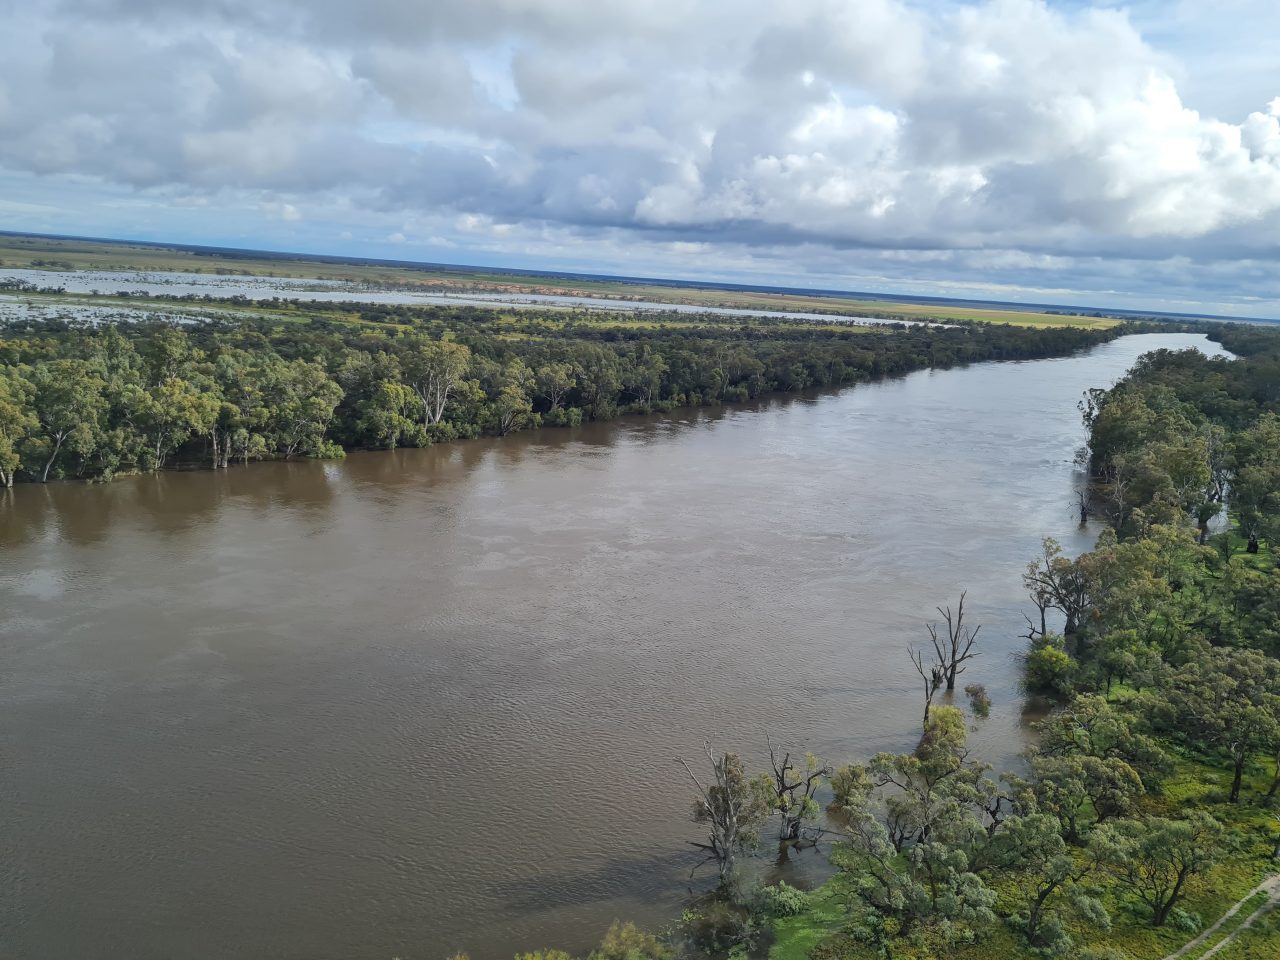 Aerial photo of a long straight stretch of river that is very high and running. The water is spreading beyond the banks onto the floodplain. The banks are lined with trees that are inundated with water. The sky has patches of blue between very thick clouds, however the sun is breaking through on one section.